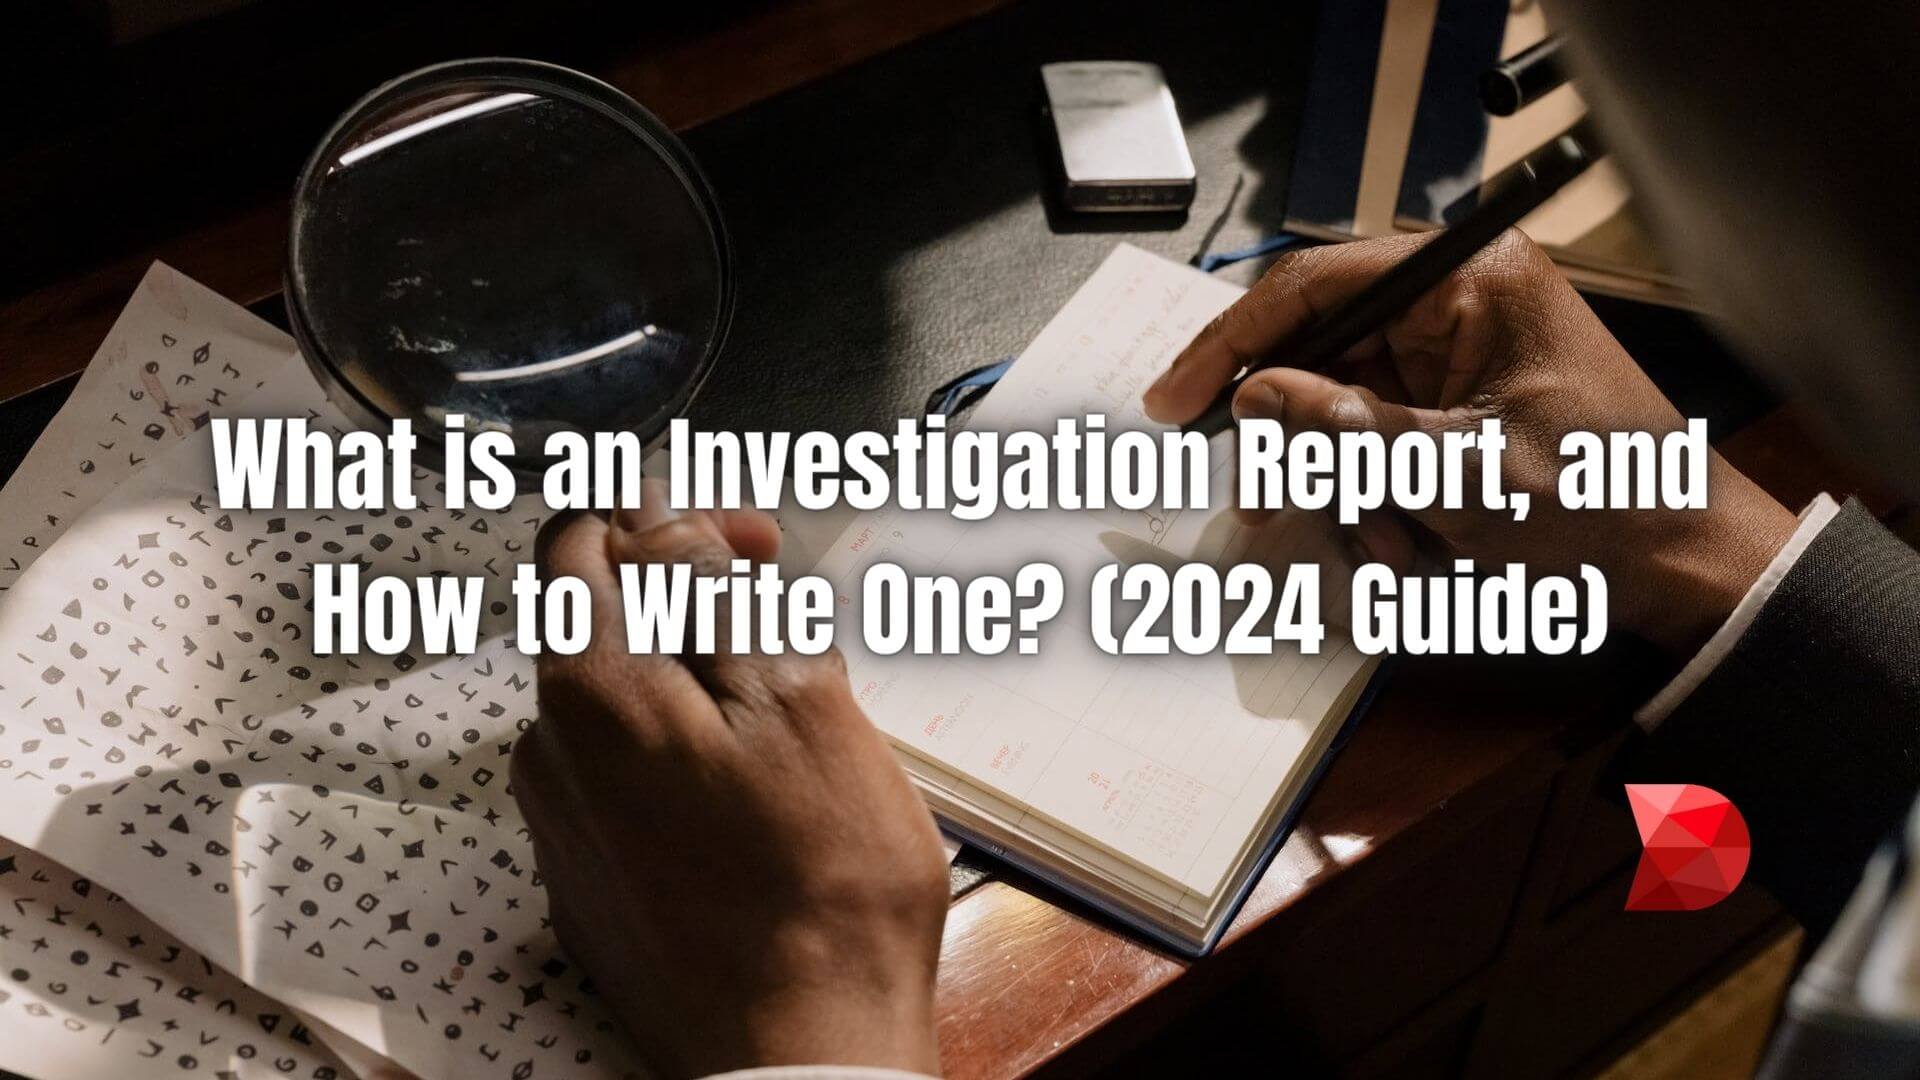 What is an Investigation Report, and How to Write One? - DataMyte